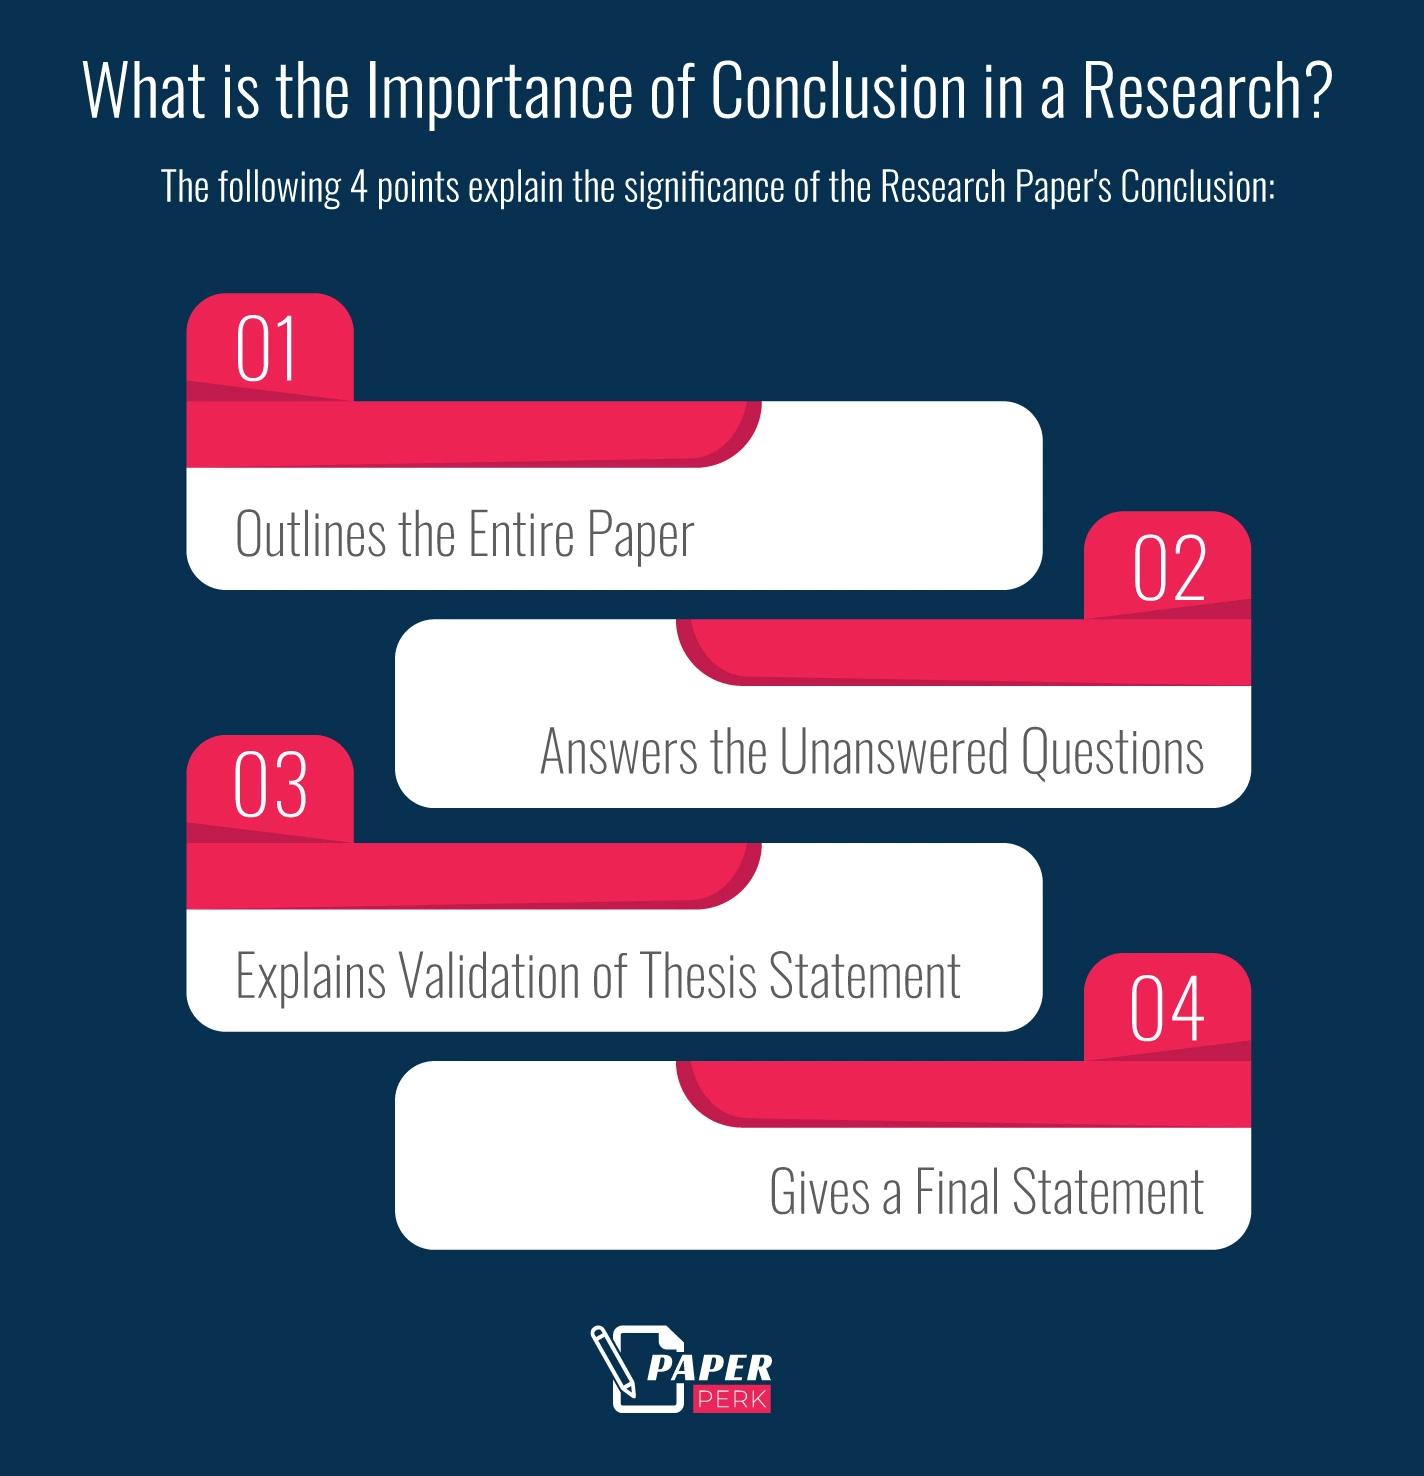 What is the Importance of Conclusion in a Research